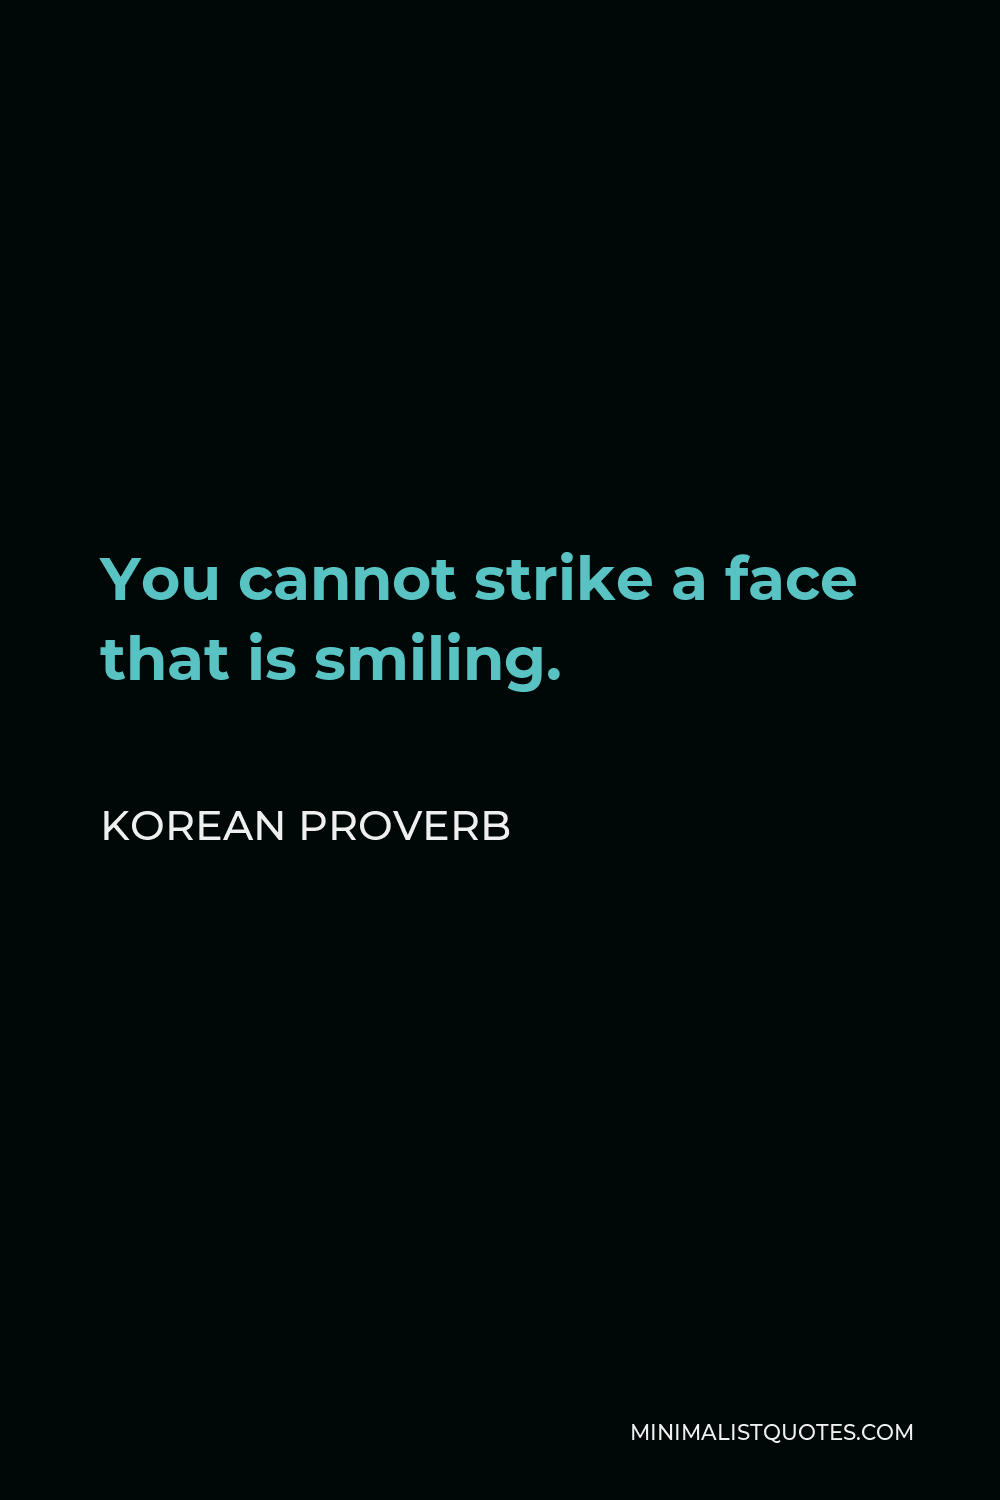 Korean Proverb Quote - You cannot strike a face that is smiling.